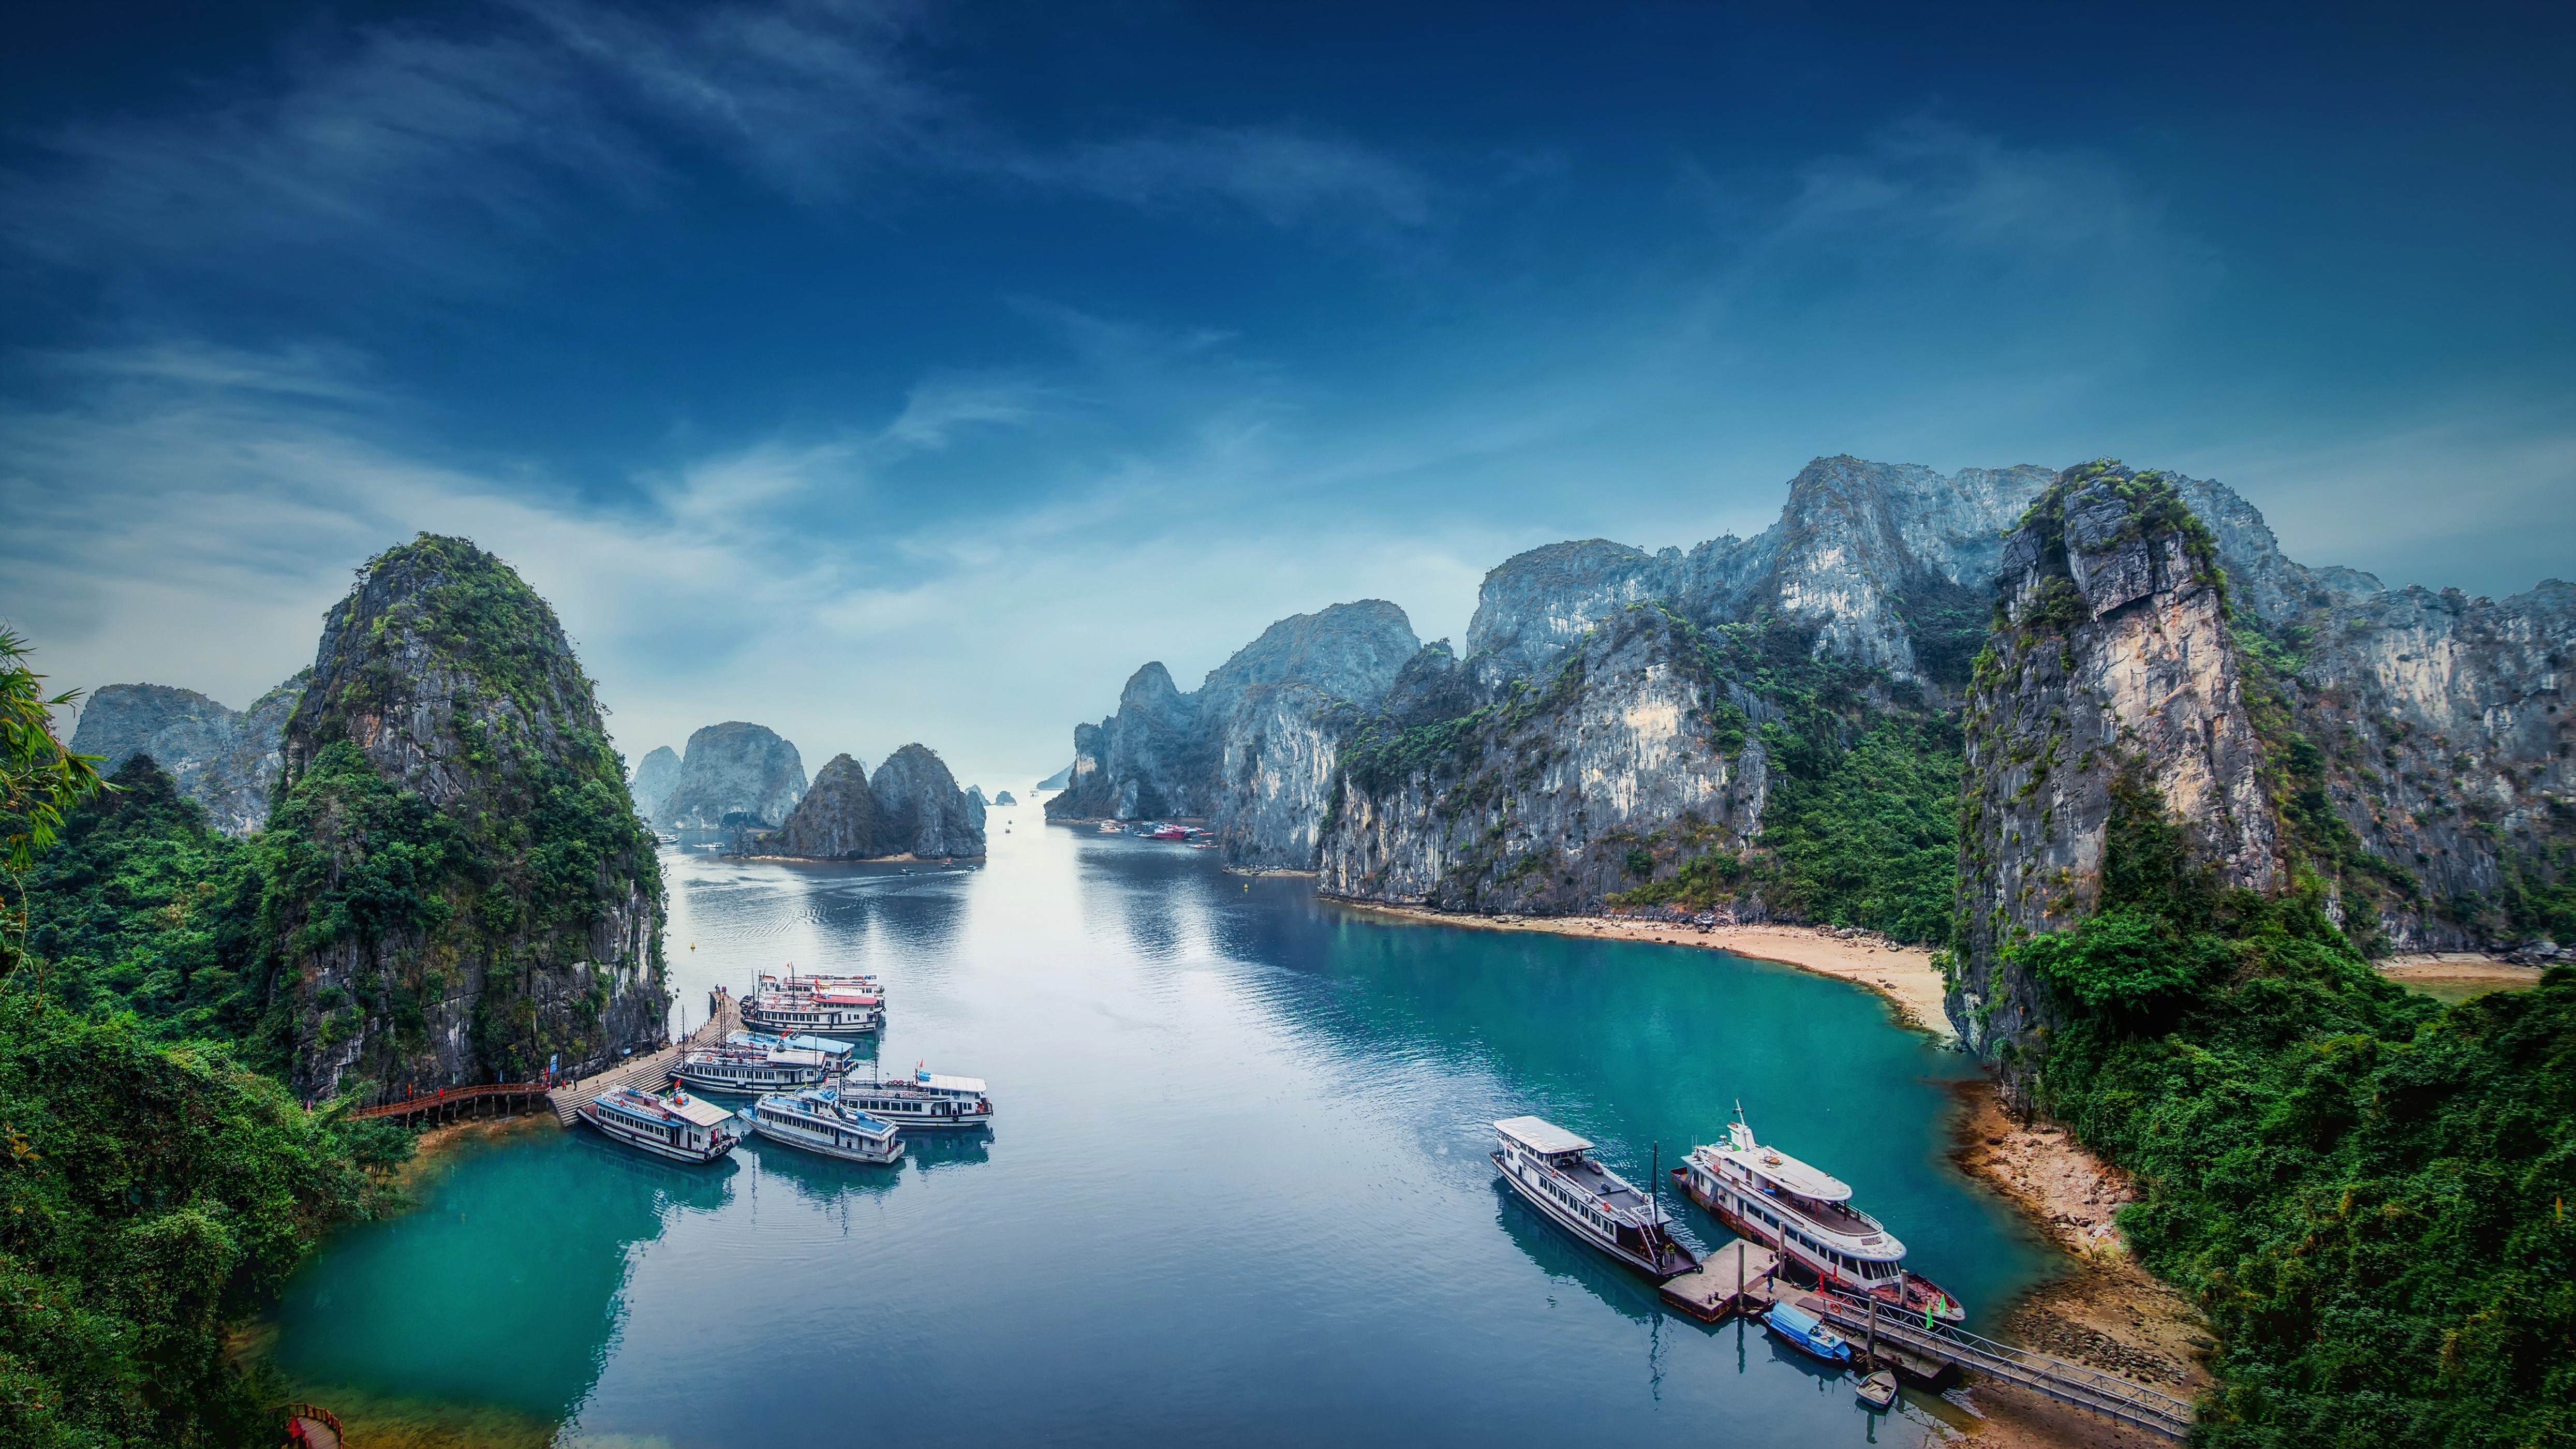 Experience the breathtaking beauty and rich culture of Ha Long, Vietnam with our expertly guided tours